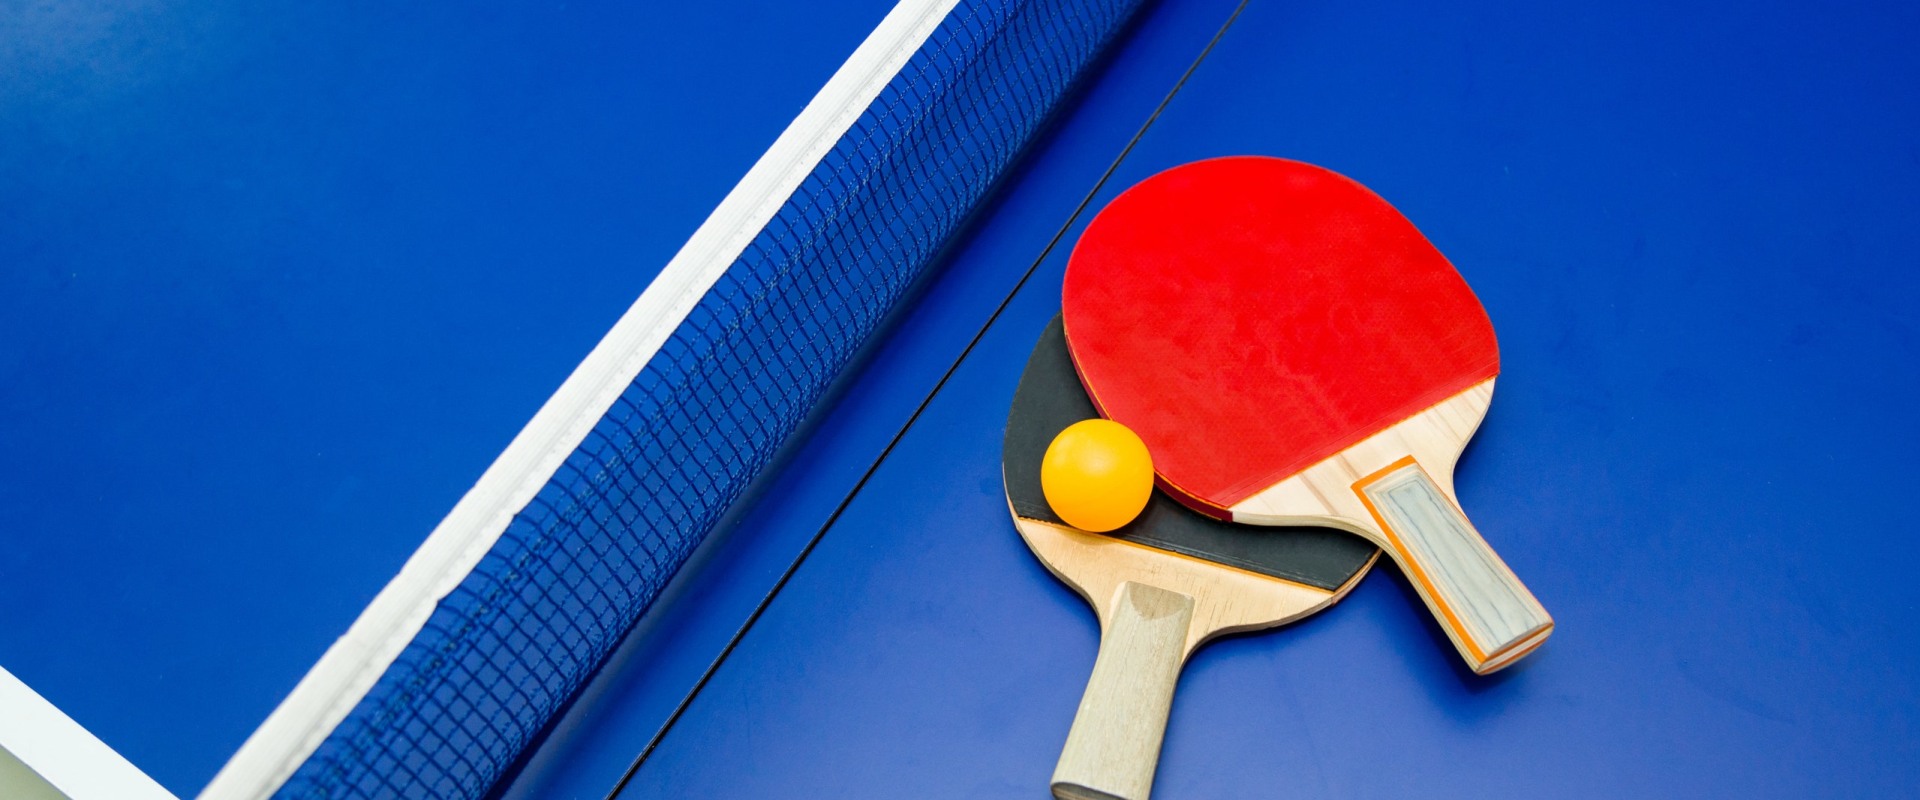 Table Tennis: A Fun and Challenging Recreational Activity